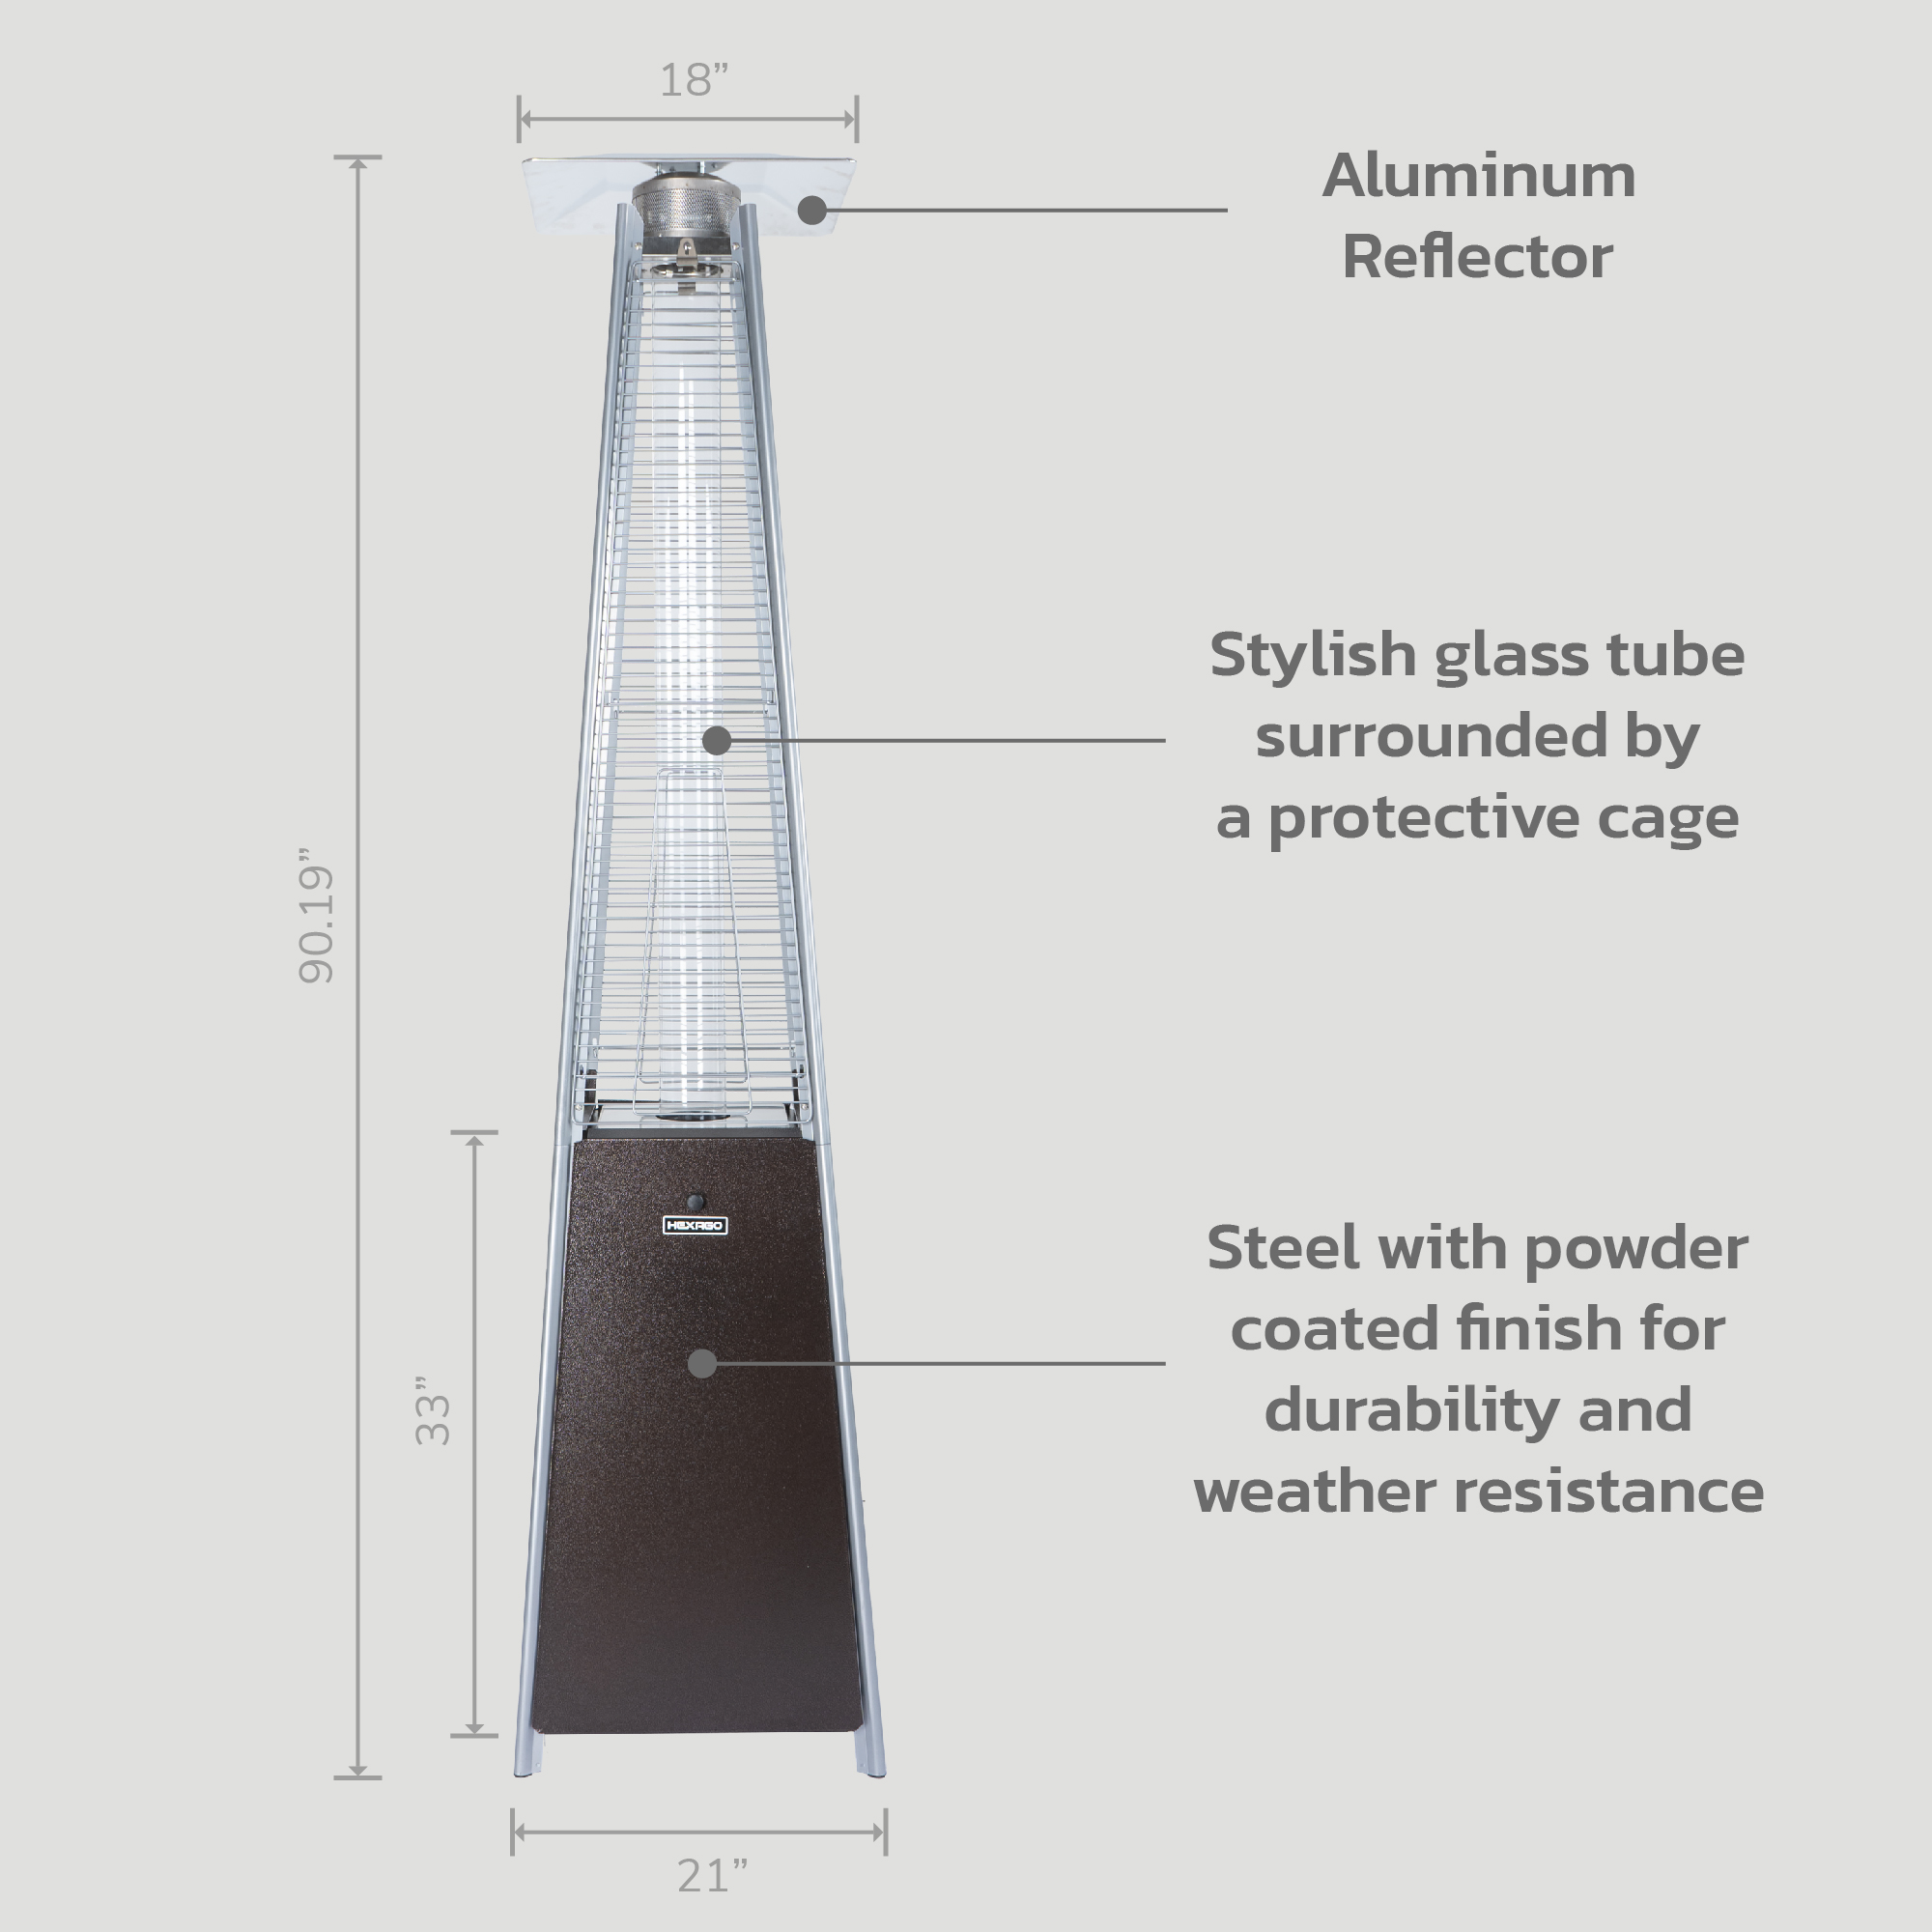 HEXAGO 40,000 BTU Pyramid Comme rcial Outdoor Patio Heater with Wheels, ETL Listed - image 3 of 7